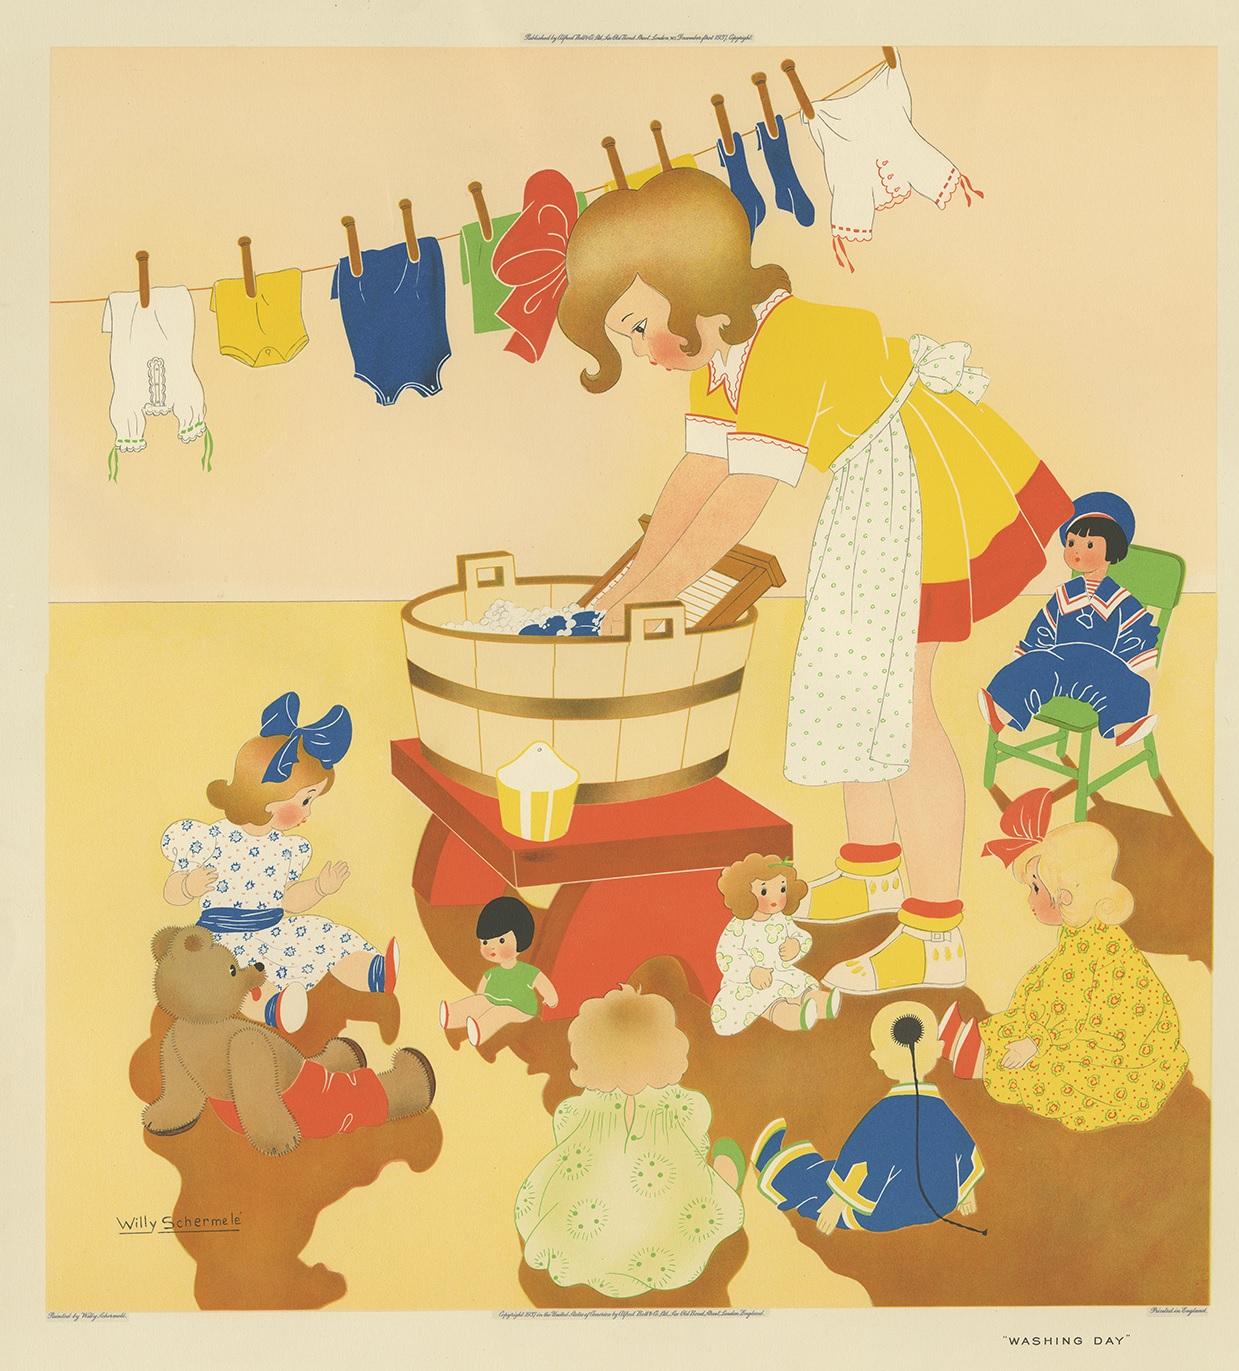 Antique print titled 'Washing Day'. This print depicts a child playing with her dolls, doing the laundry. Created by Willy Schermelé, a Dutch illustrator for women and children. Printed in England.